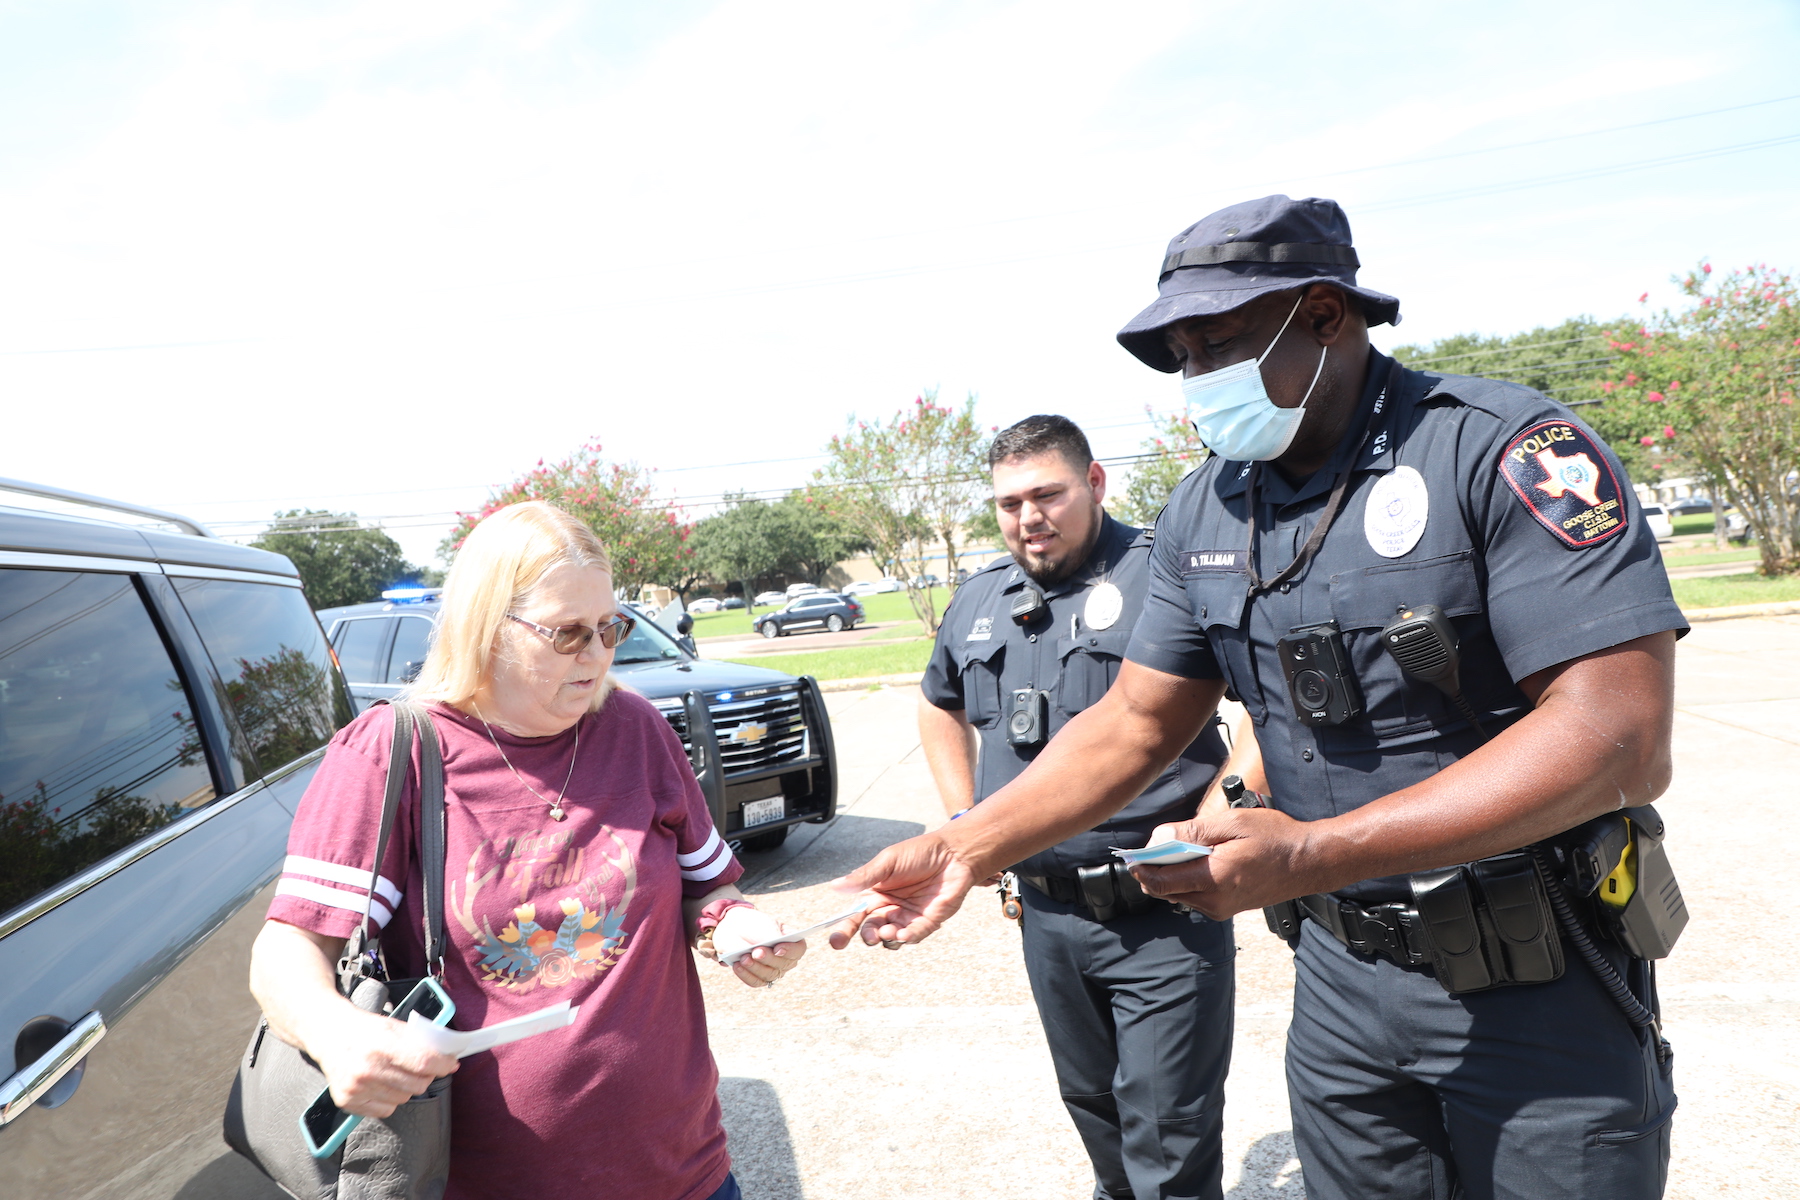 goose creek officer gives out certificate to citizen following guidelines